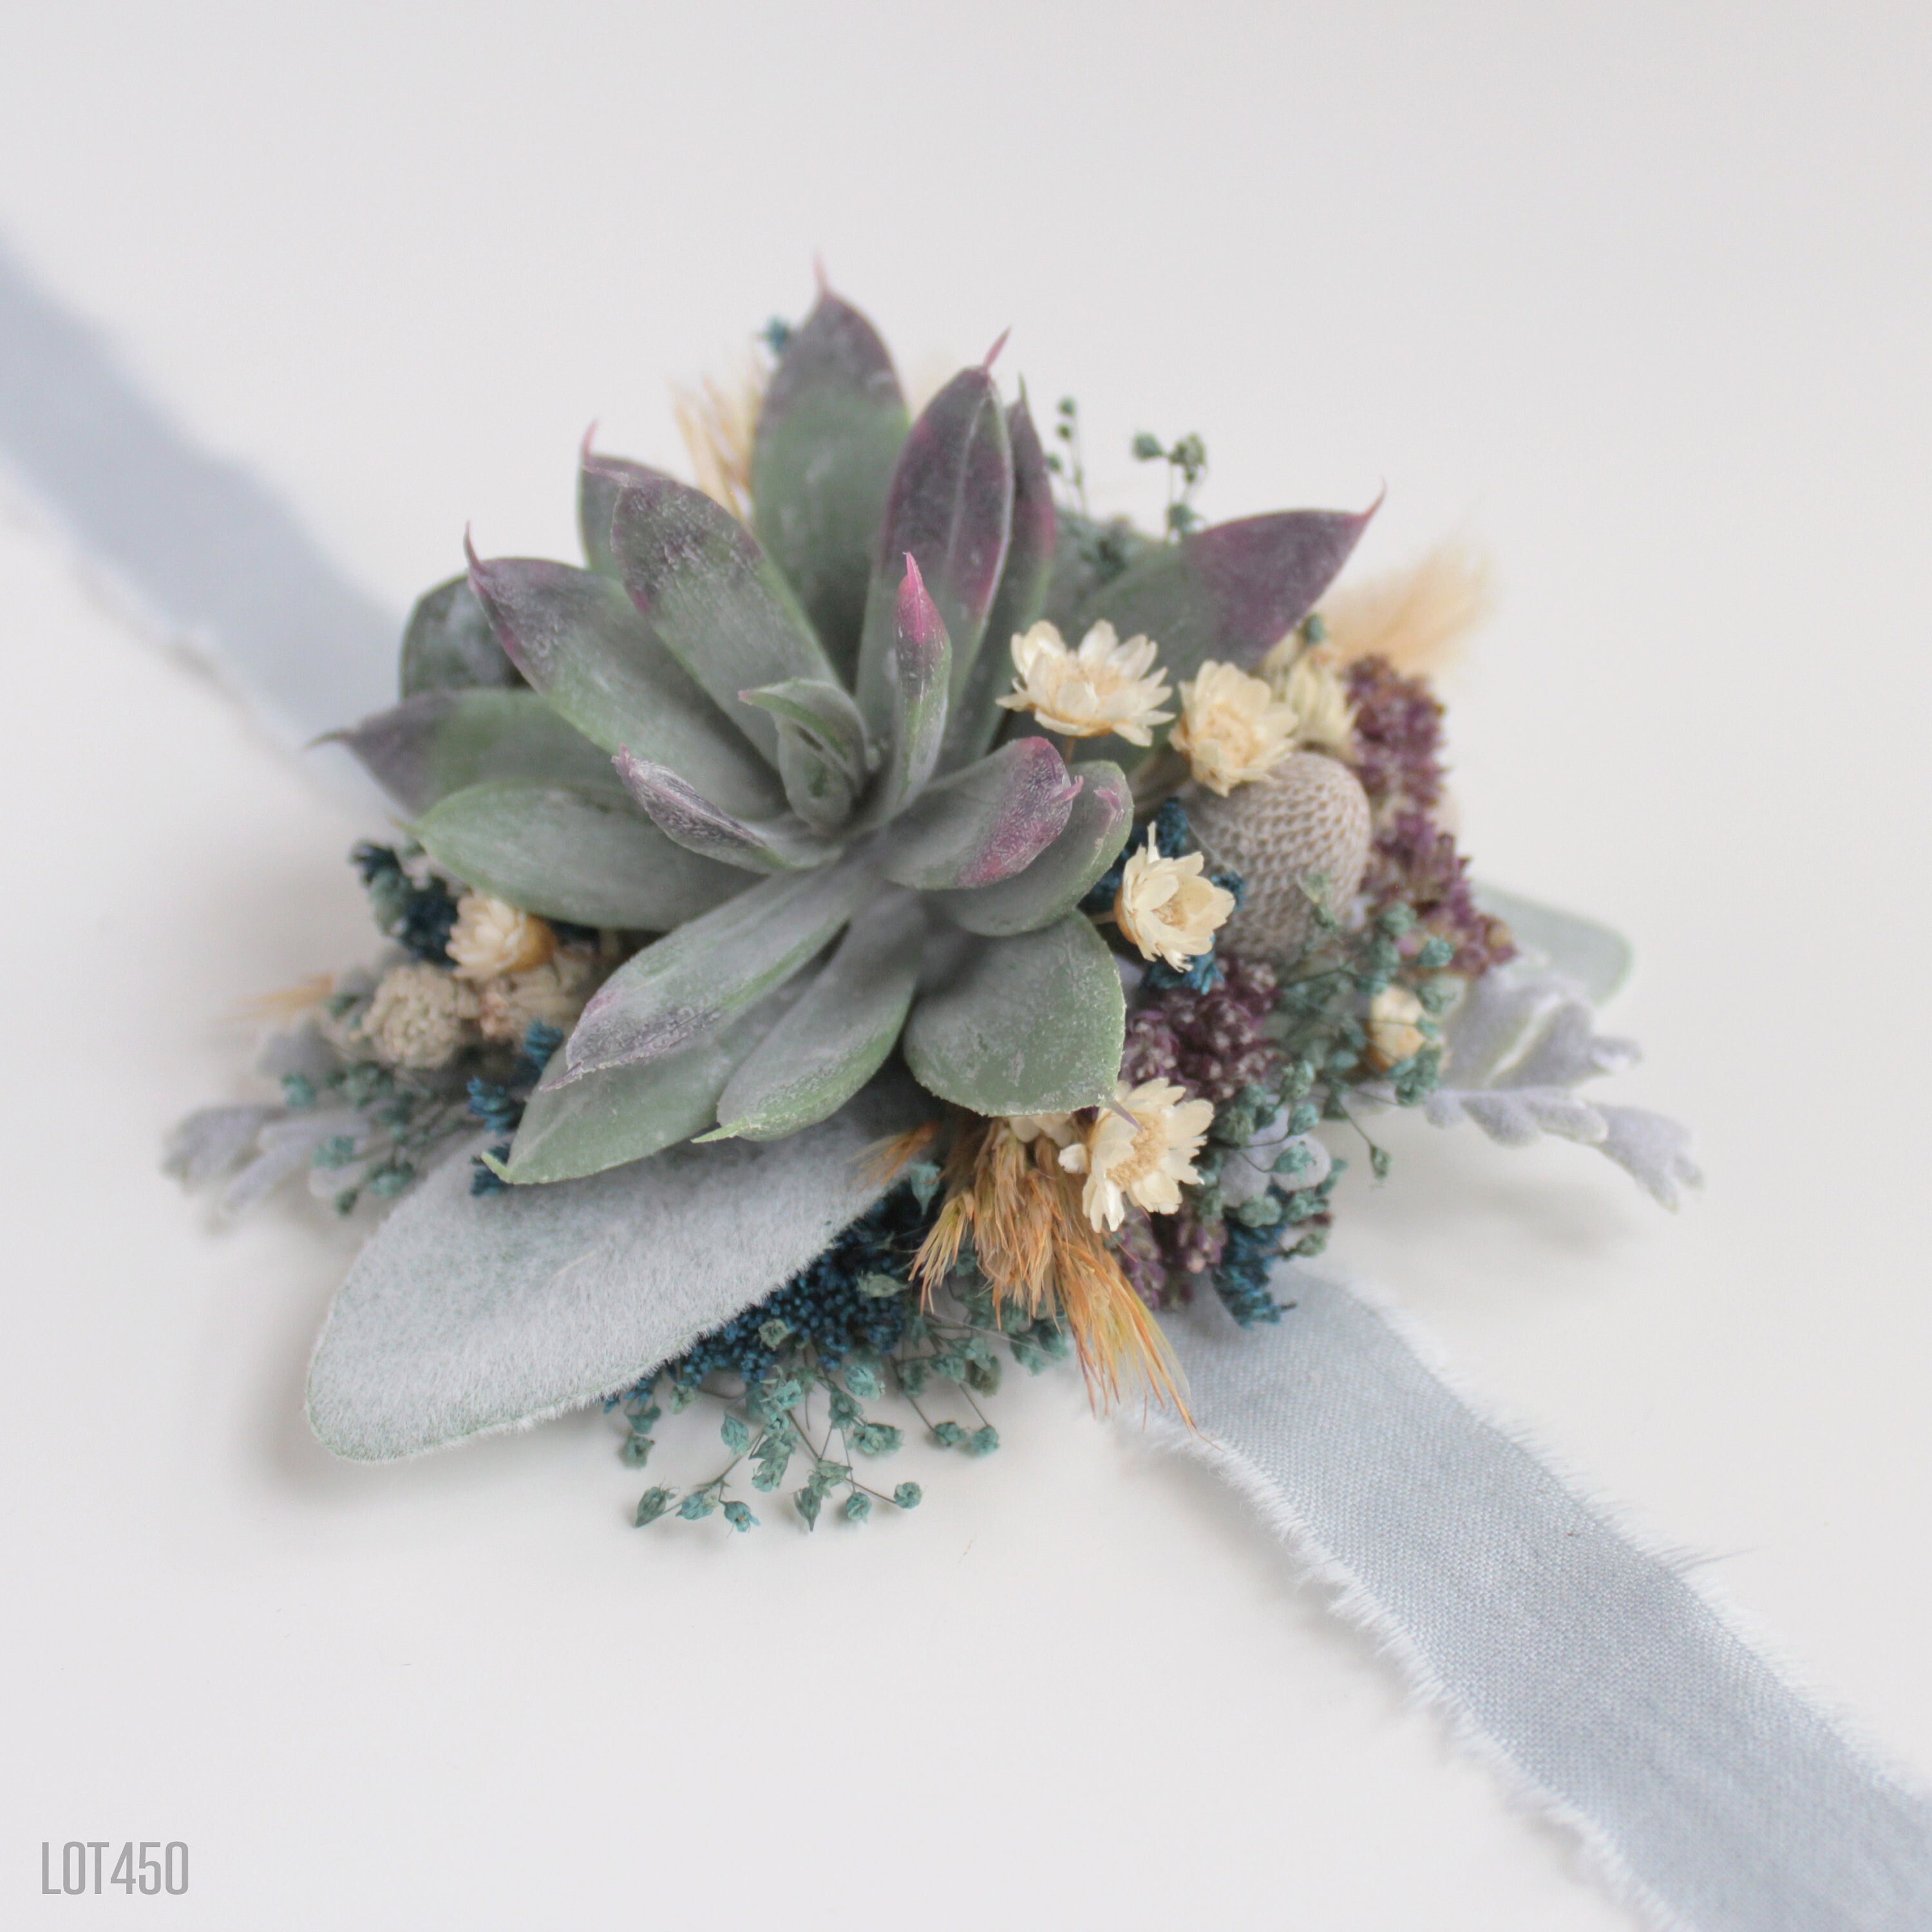 Mini Corsage Flower Bouquet With Bunny Tails And Grass For DIY Wedding,  Baby Shower, And Cake Topper Decor R230626 From Mengqiqi09, $13.23